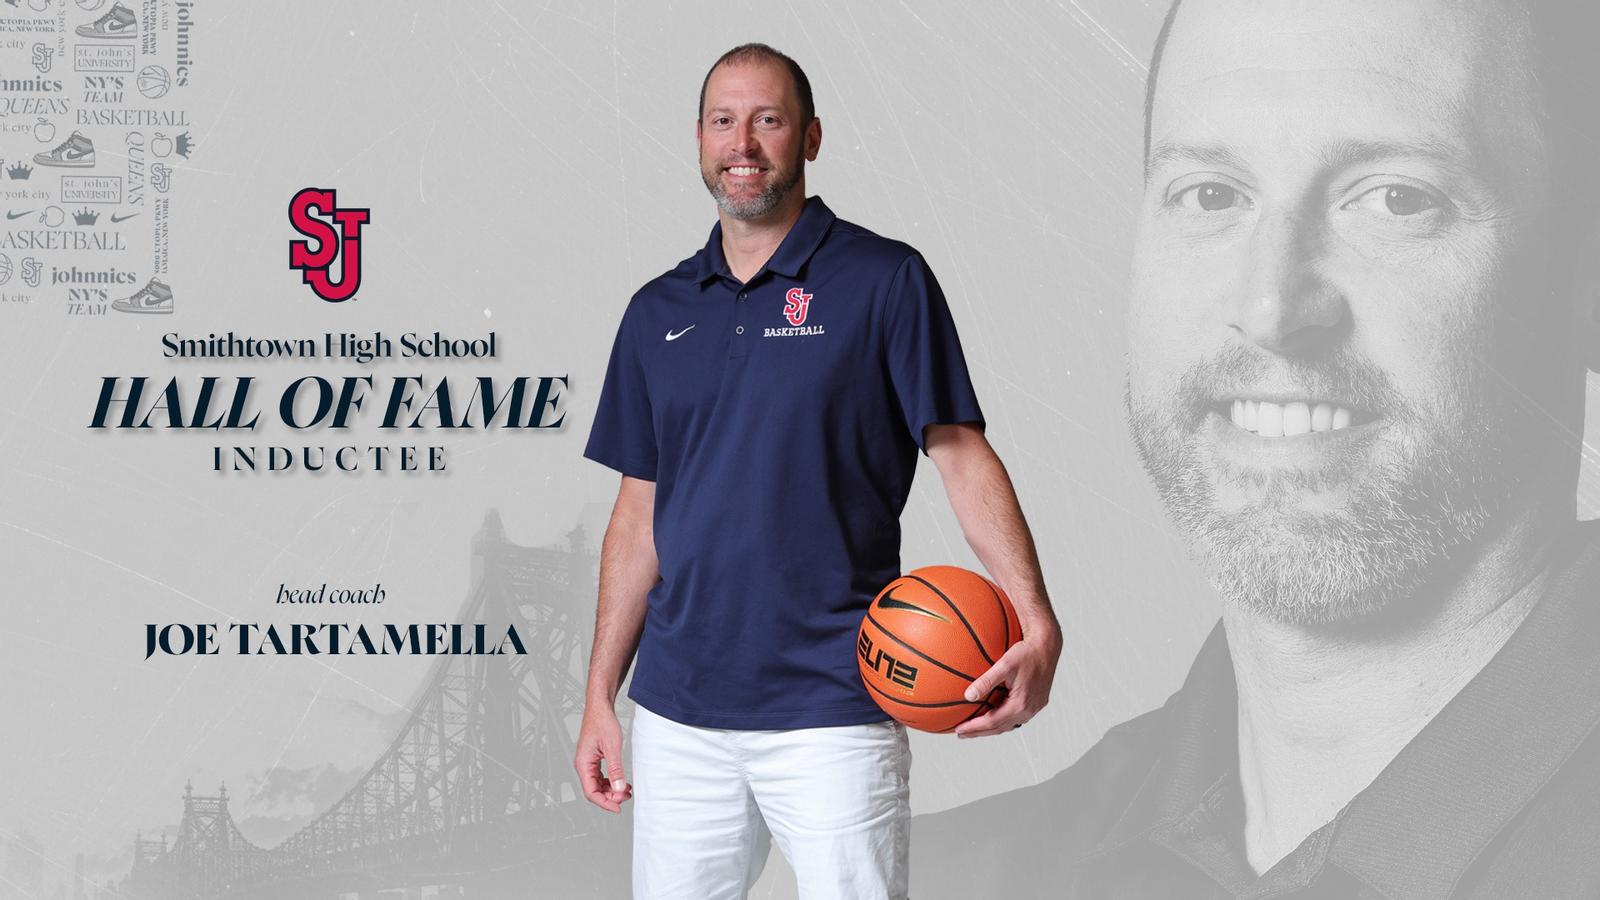 Joe Tartamella to be Inducted into Smithtown High School Hall of Fame